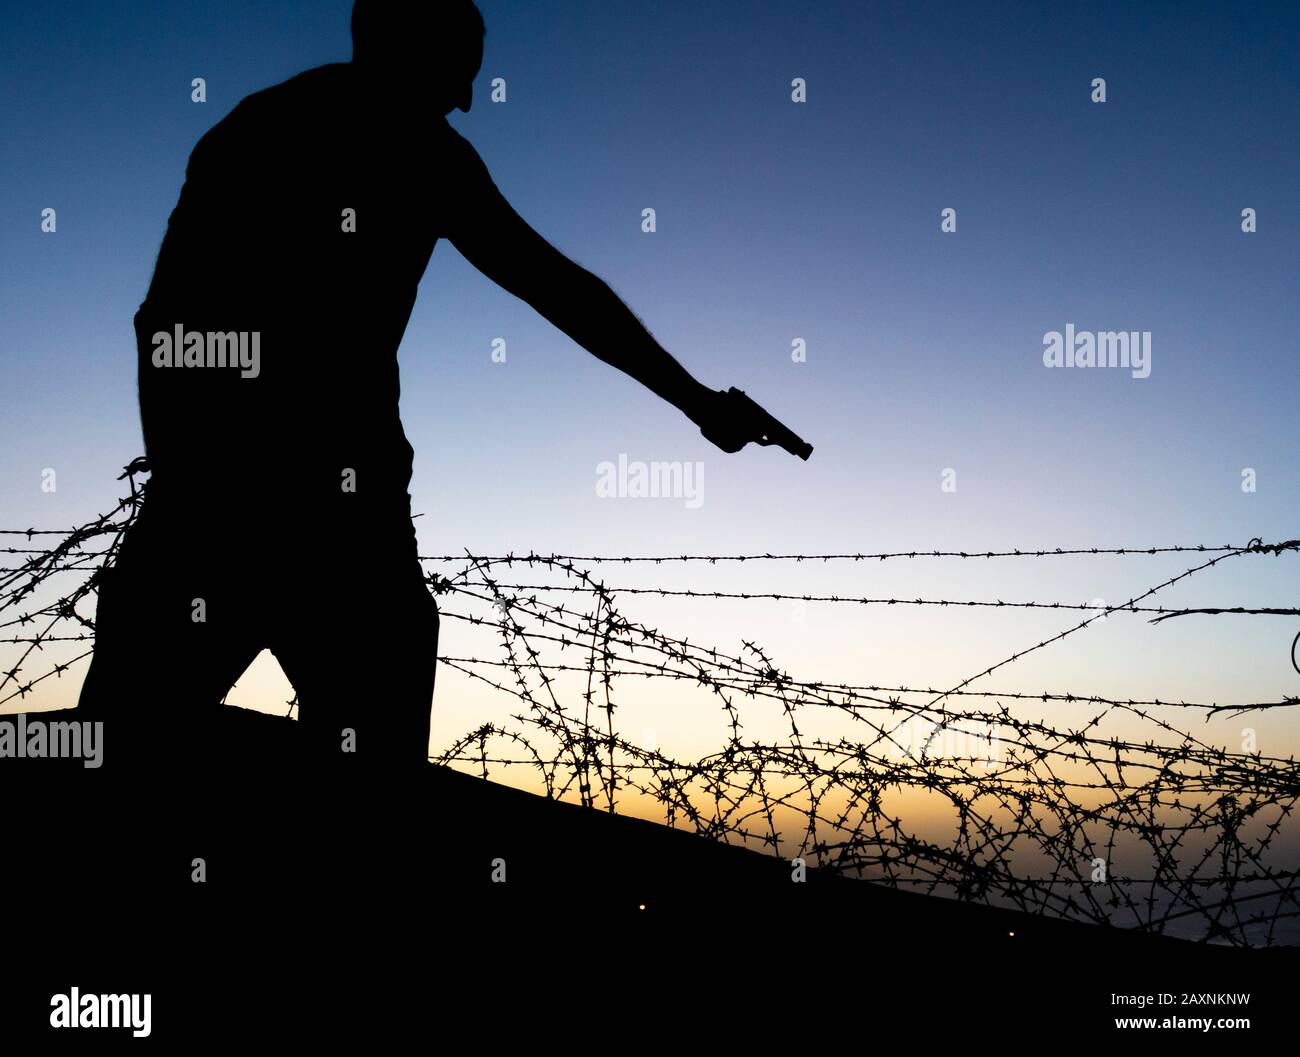 Silhouette of man pointing gun near barbed wire fence. Stock Photo